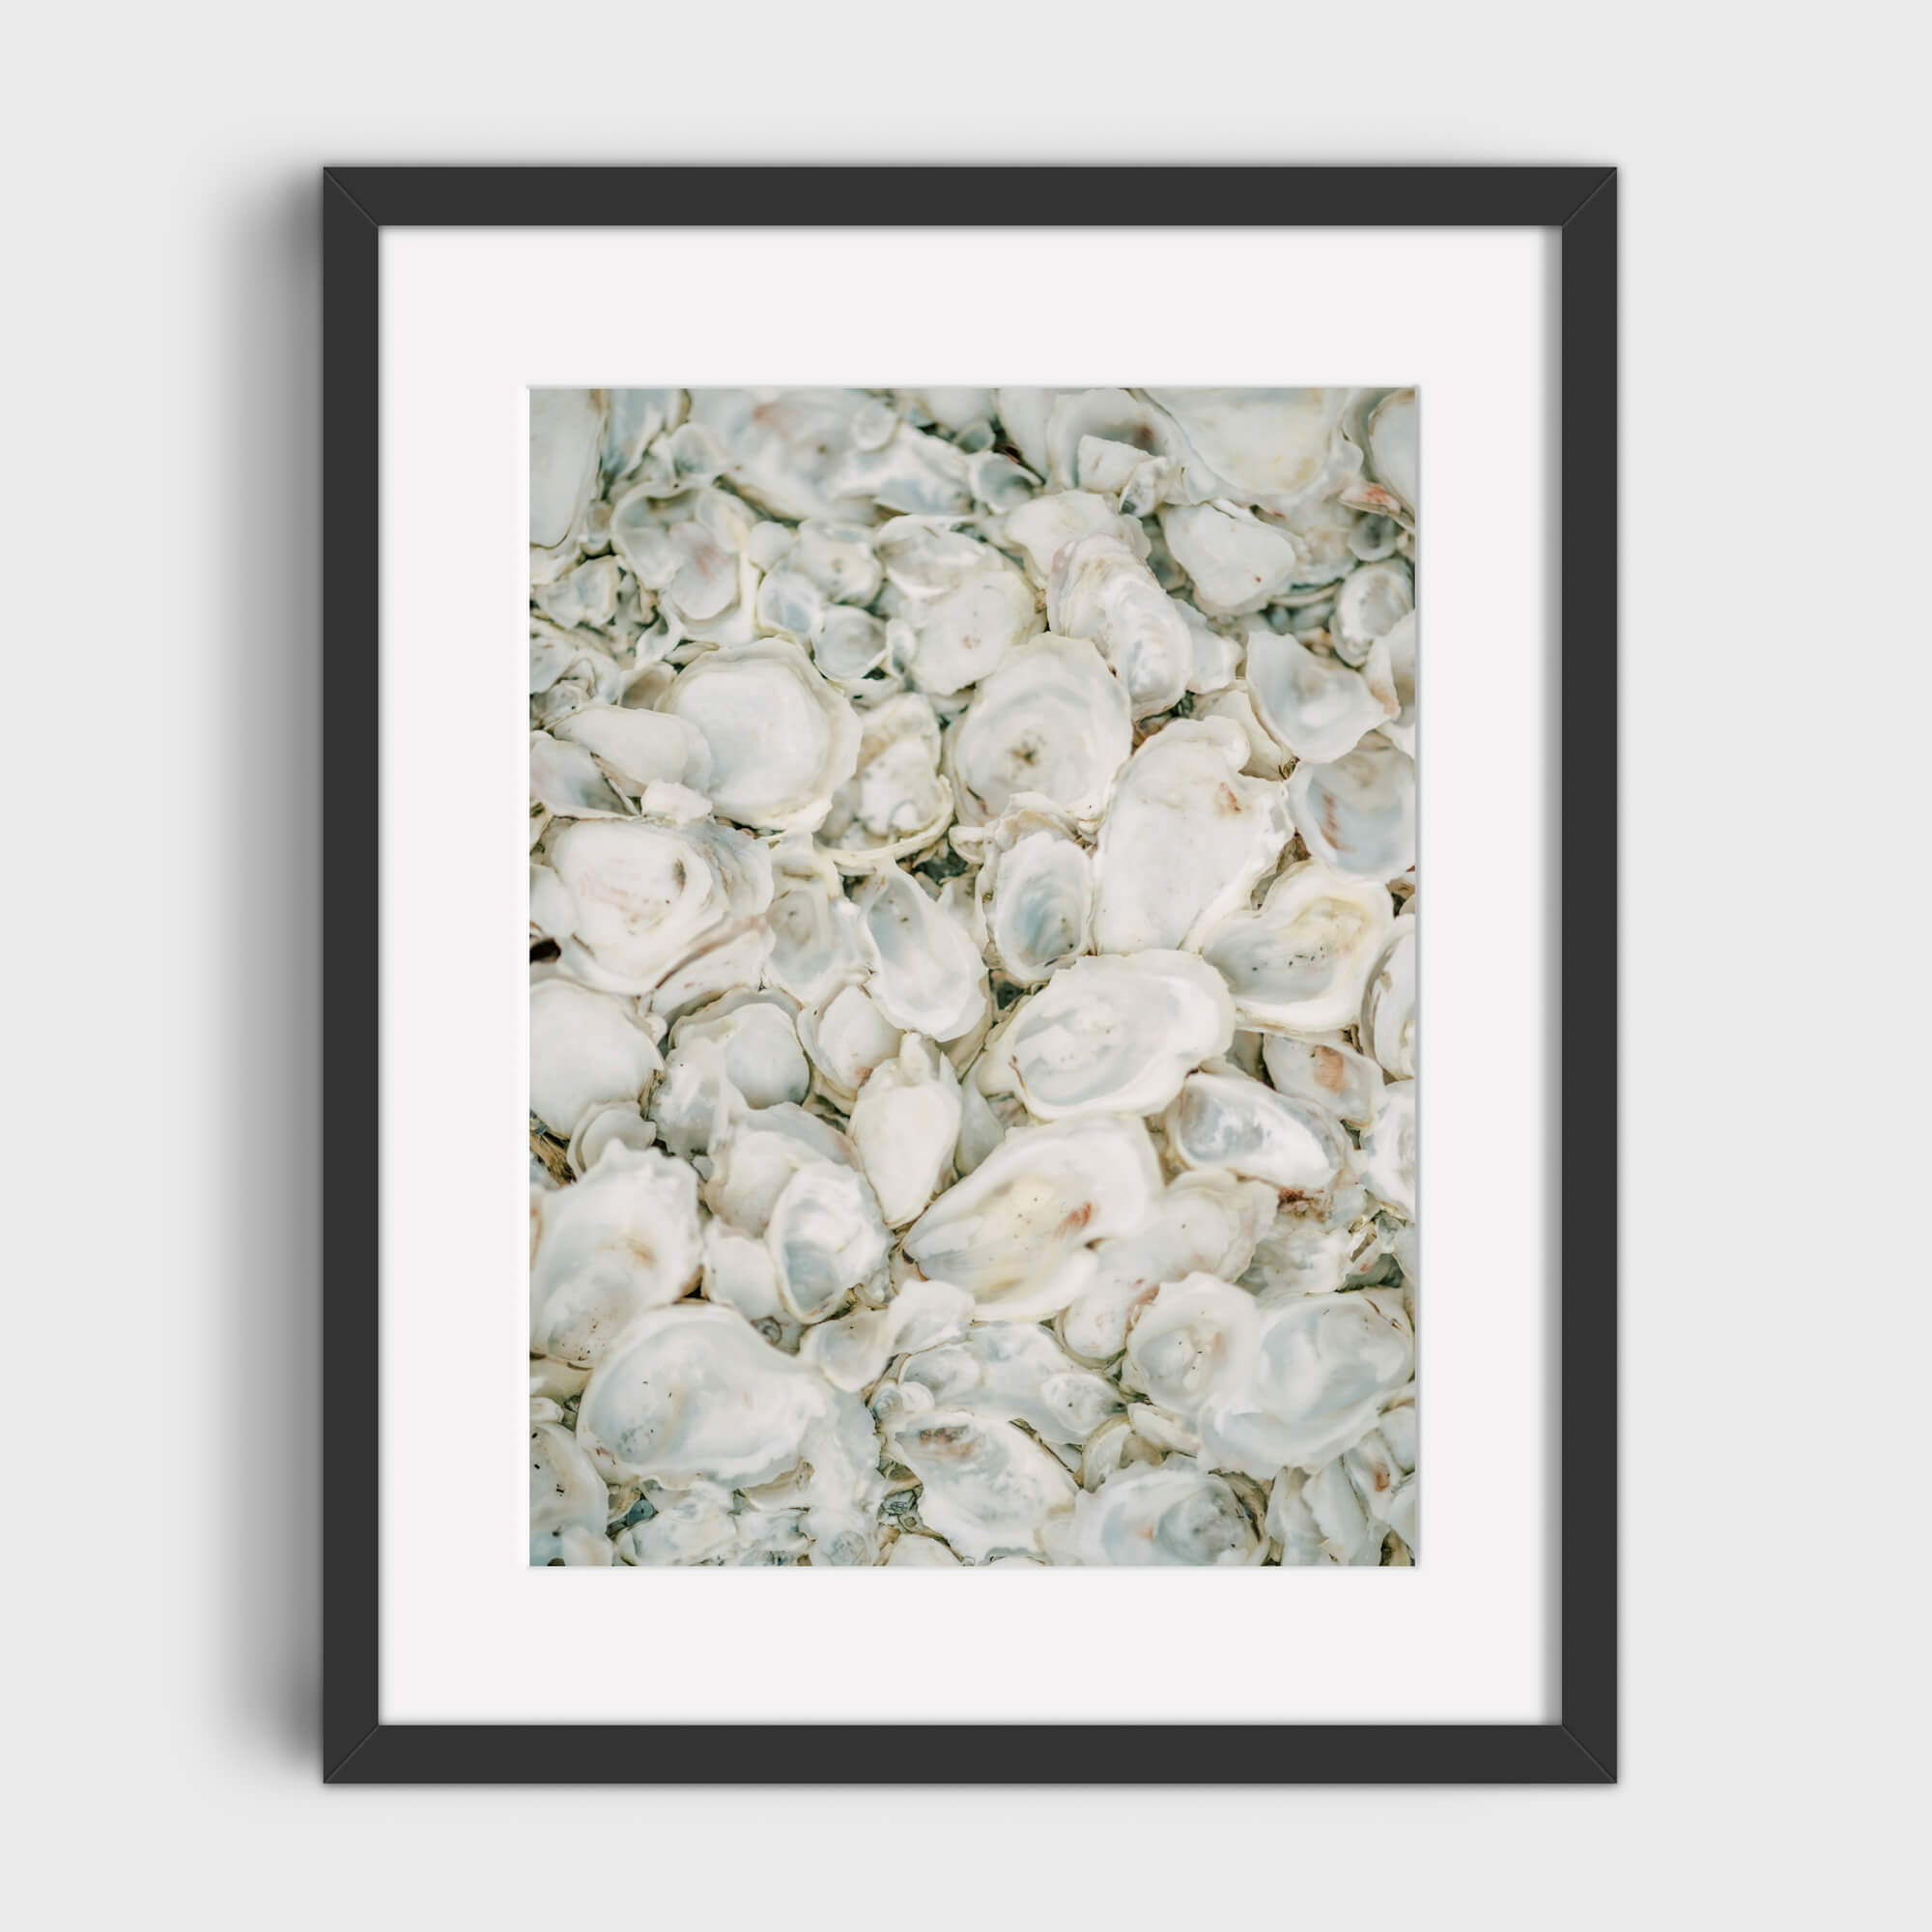 Oysters Galore - Care Studio Prints